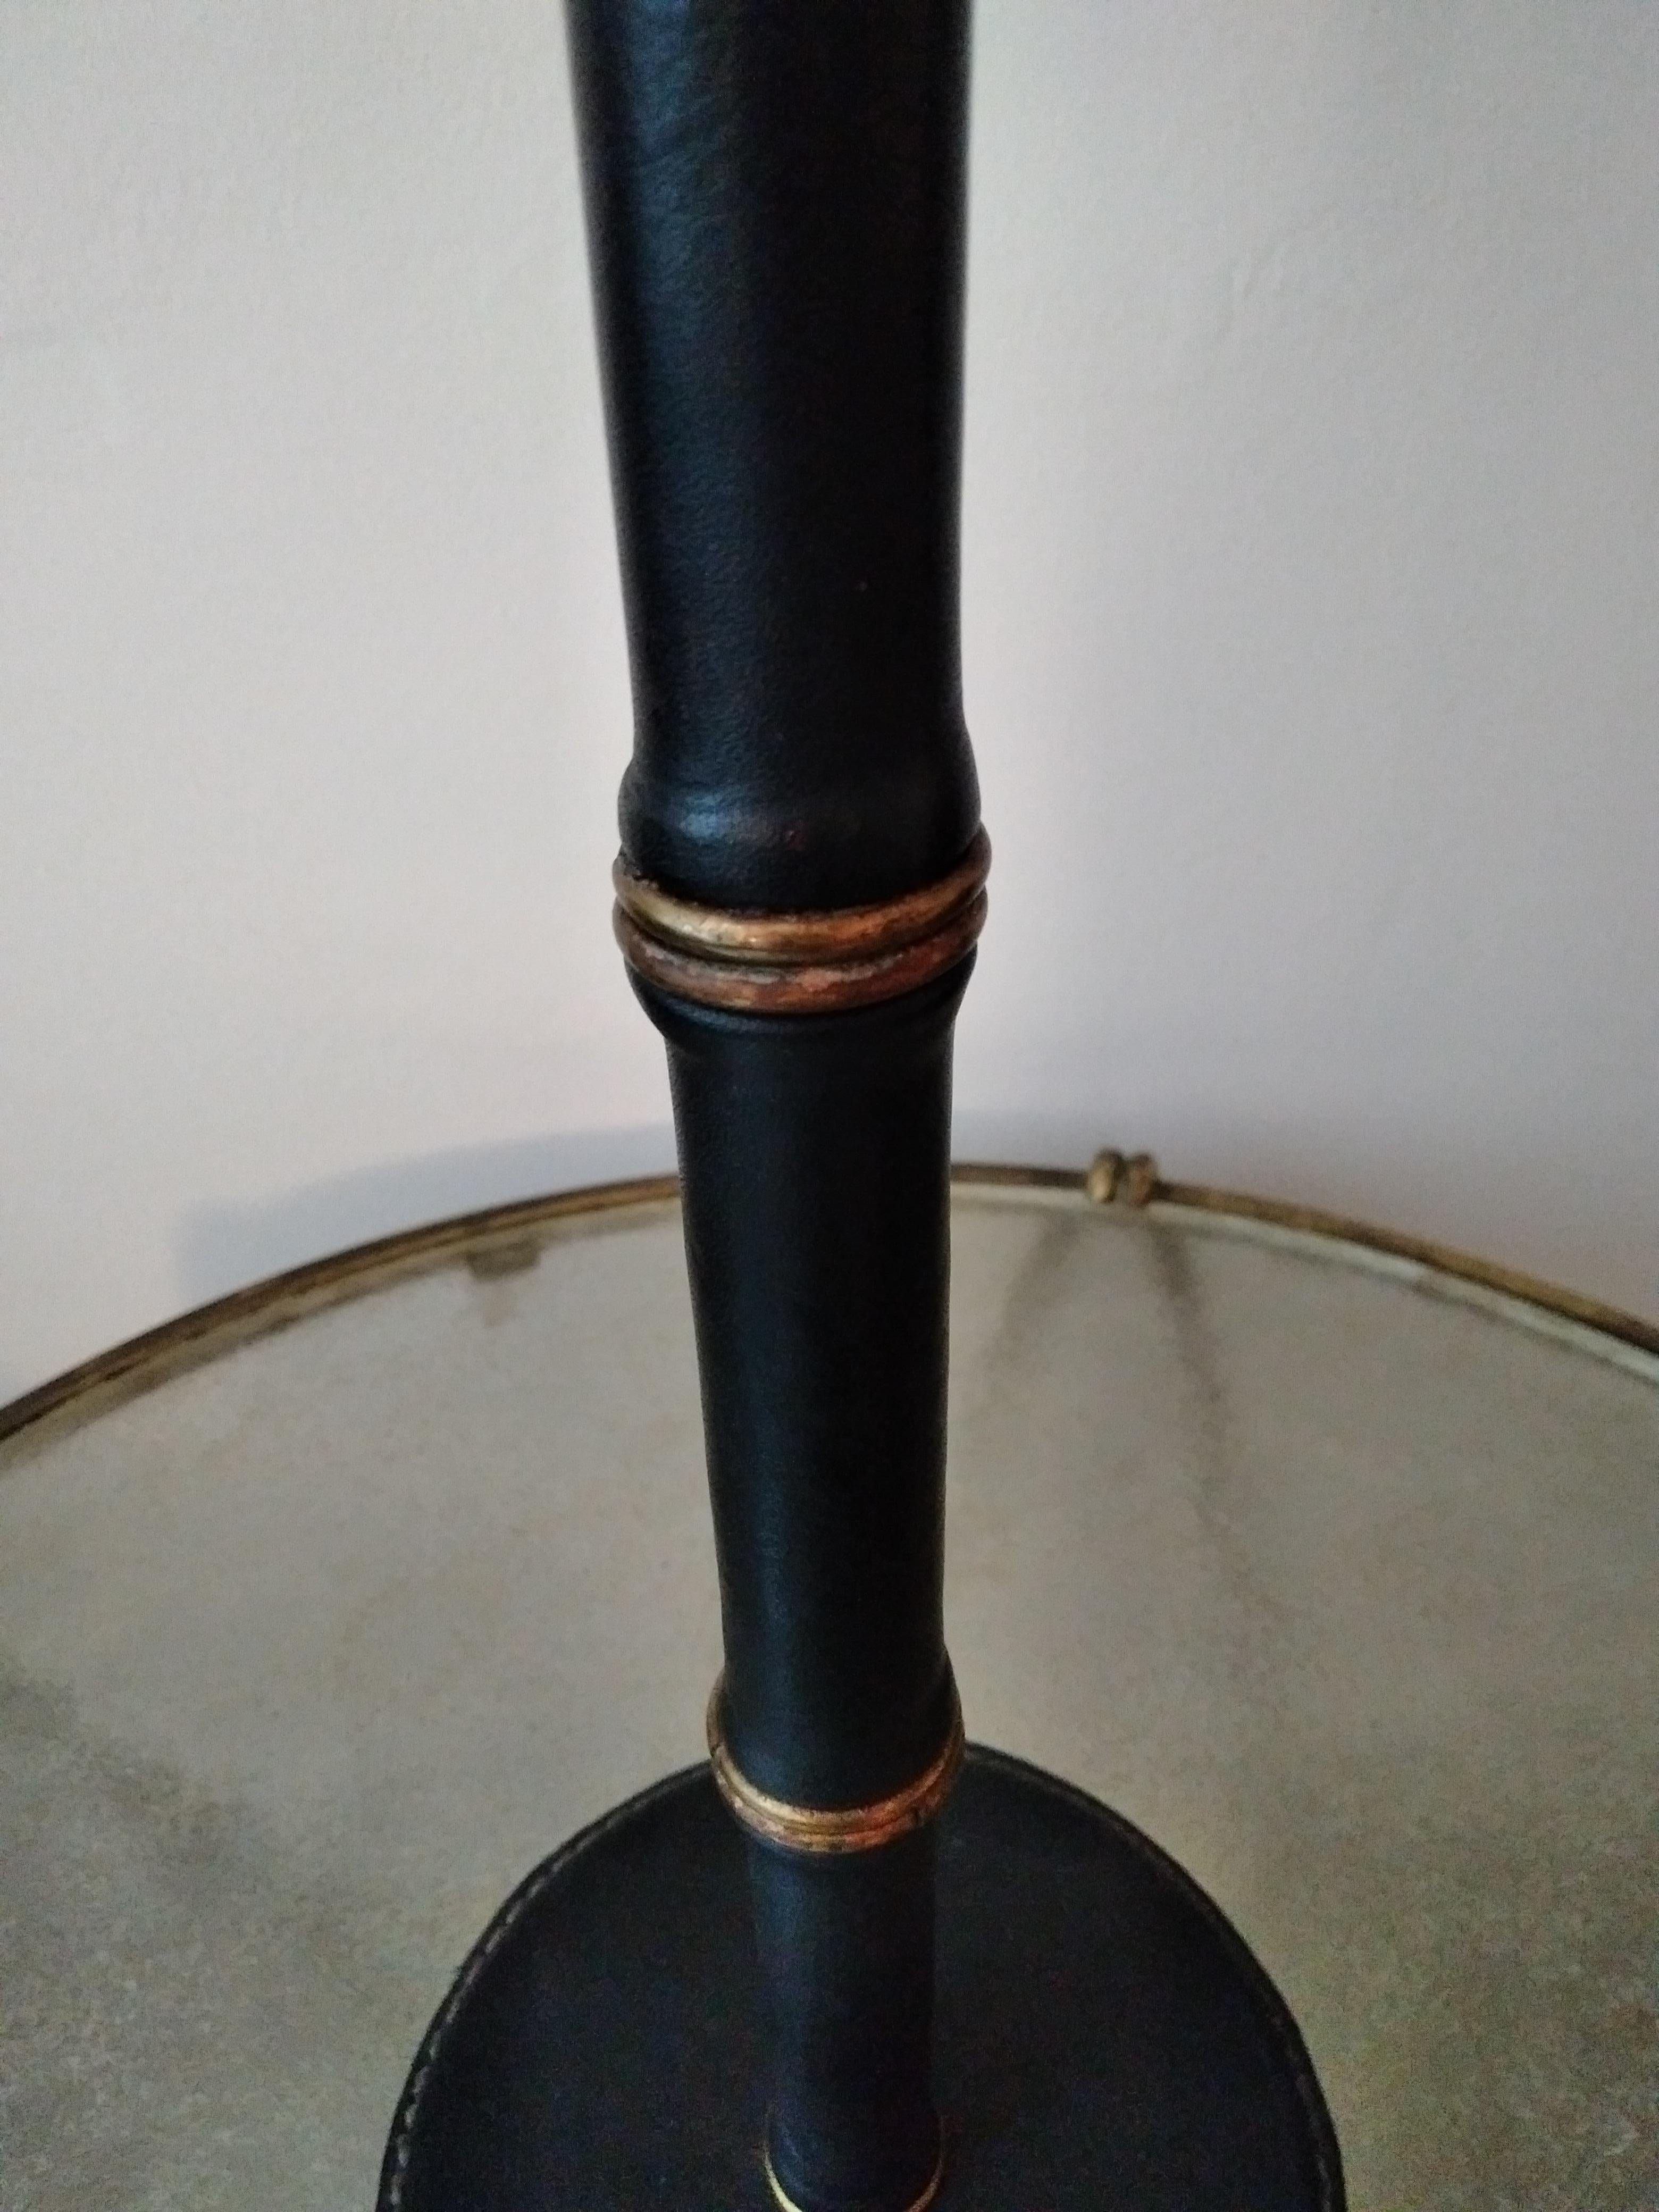 Brass Jacques Adnet Black Stitched Leather Table Lamp, Bamboo Form, French, 1950s For Sale